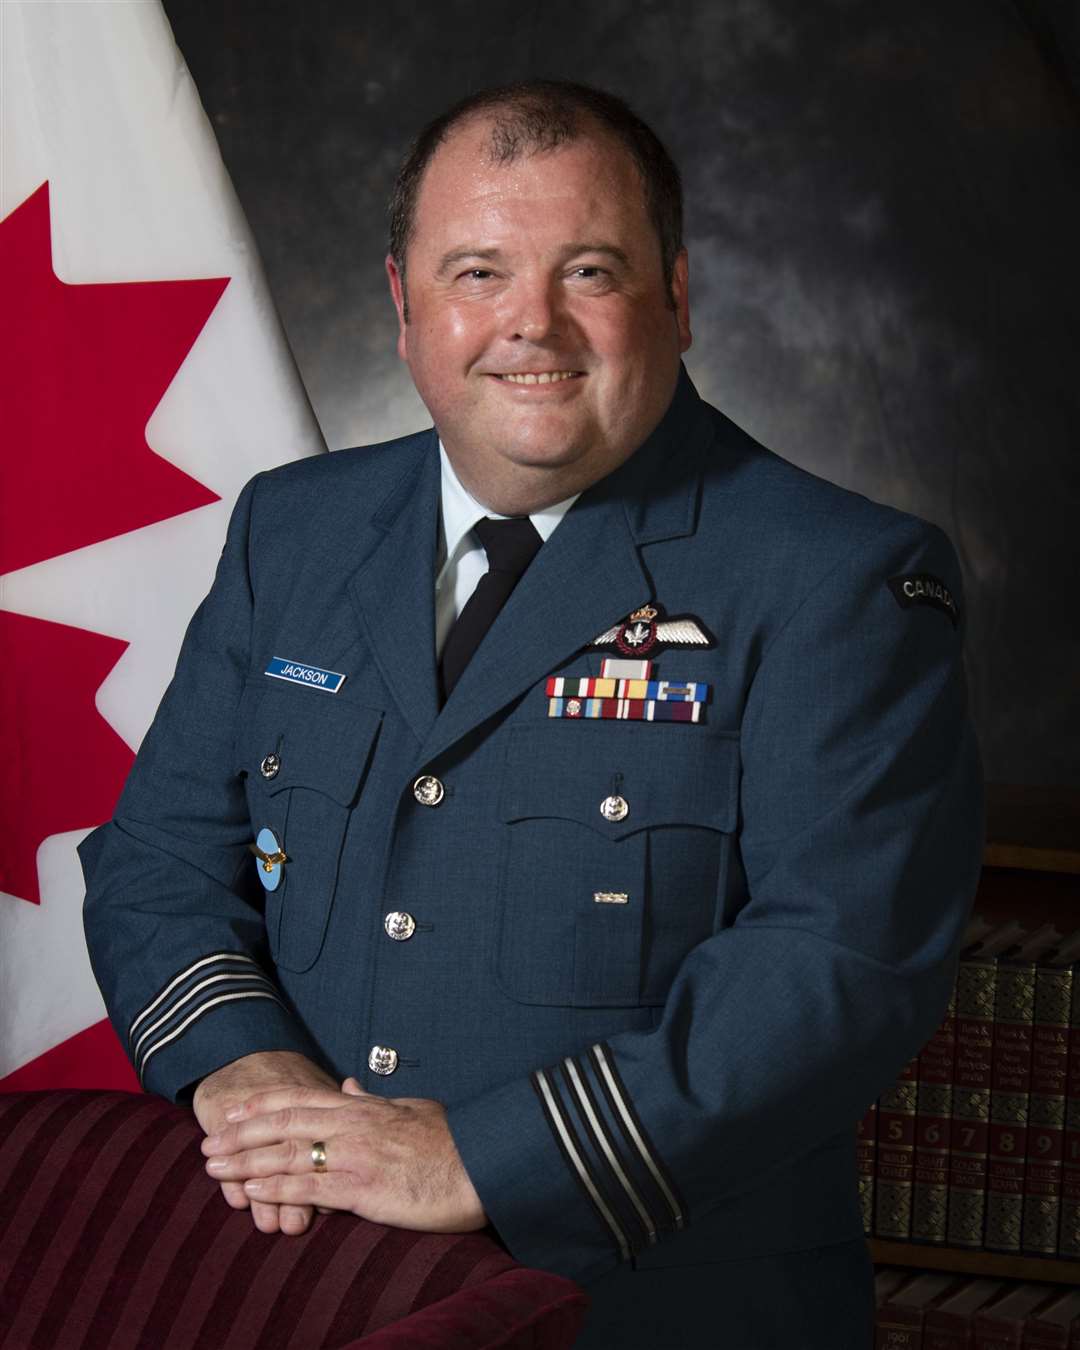 Lieutenant-Colonel Gregor Jackson from Thurso has become the commander of 426 Squadron in the Royal Canadian Air Force.